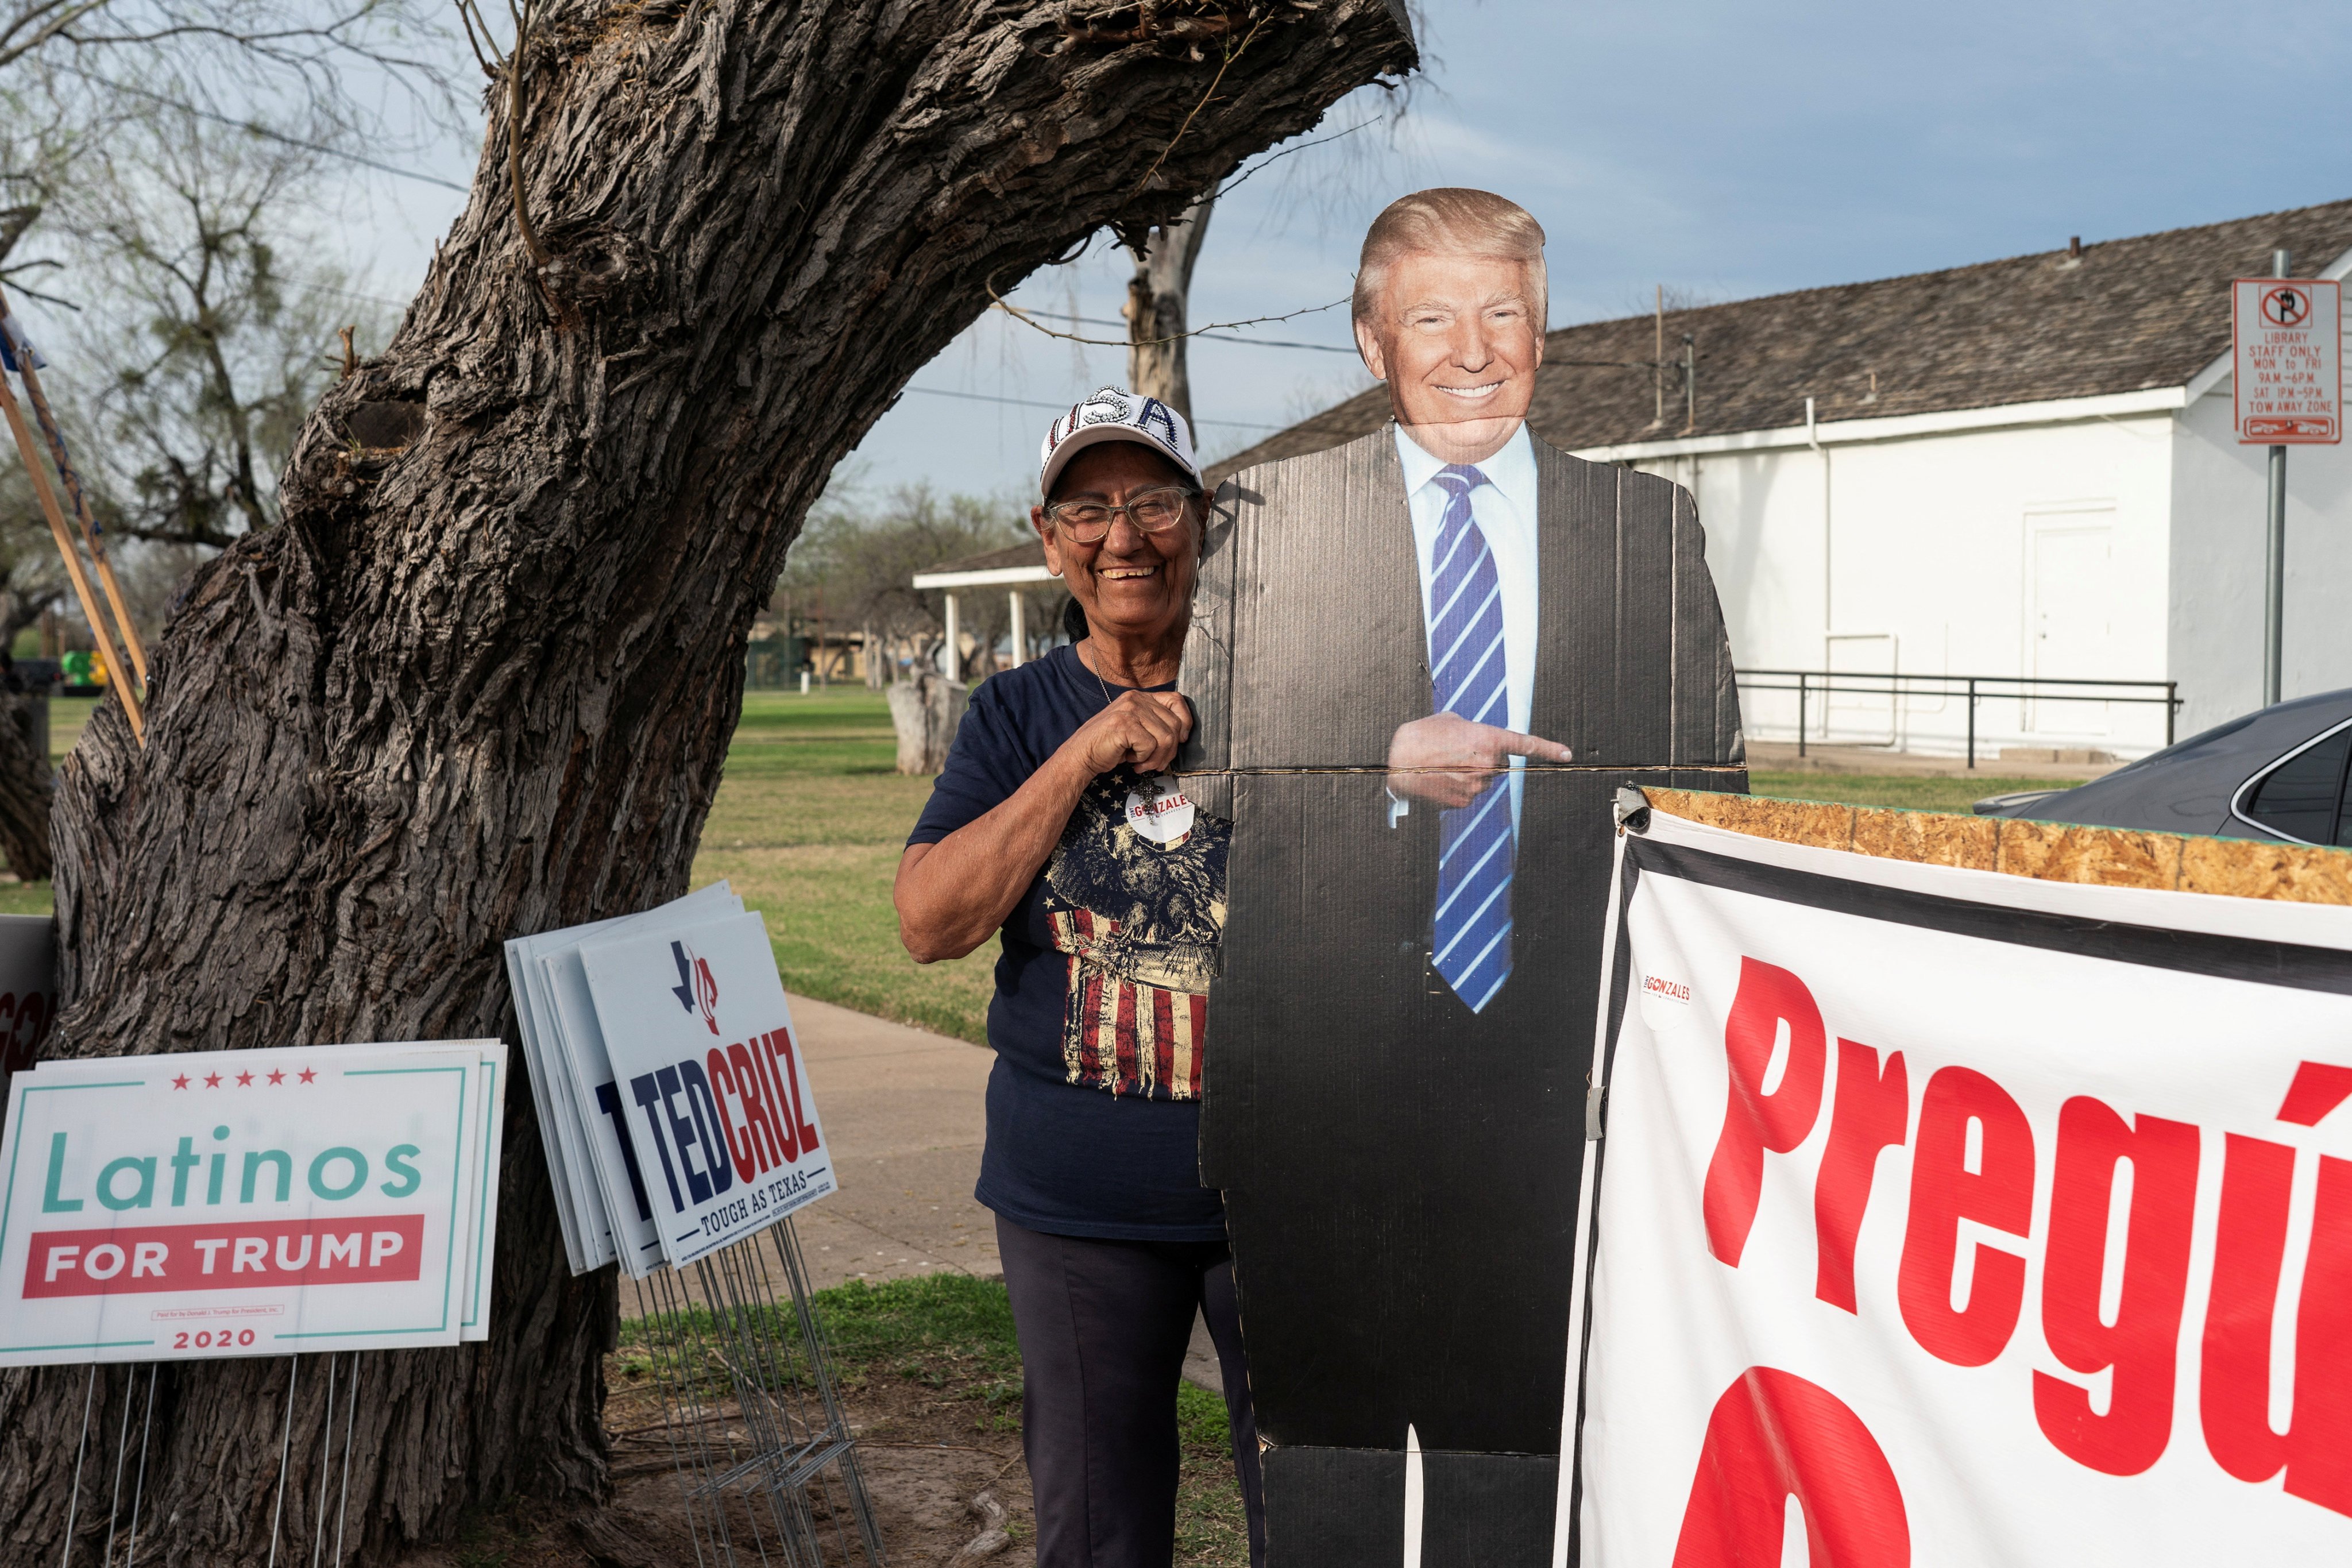 A Donald Trump supporter poses with a life-size cutout of the former US president in front of a polling station in Eagle Pass, Texas, on February 27. The United States is one of more than 60 countries holding national elections this year at a time when the democratic process is under unprecedented attack. Photo: Reuters